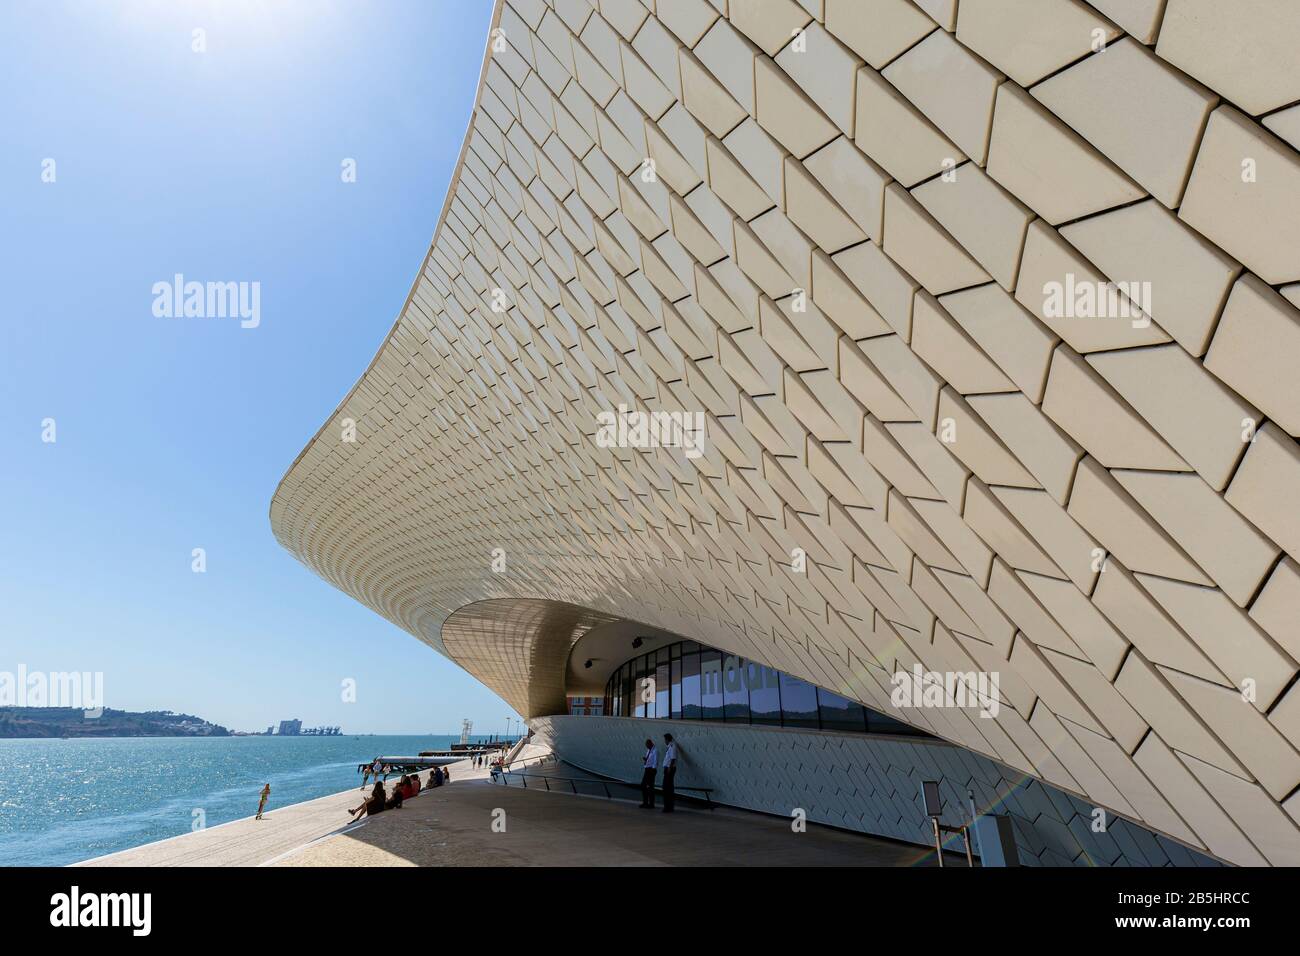 Tagus river and people in front of the Museum of Art, Architecture and Technology (MAAT) in Belem district in Lisbon, Portugal. Stock Photo